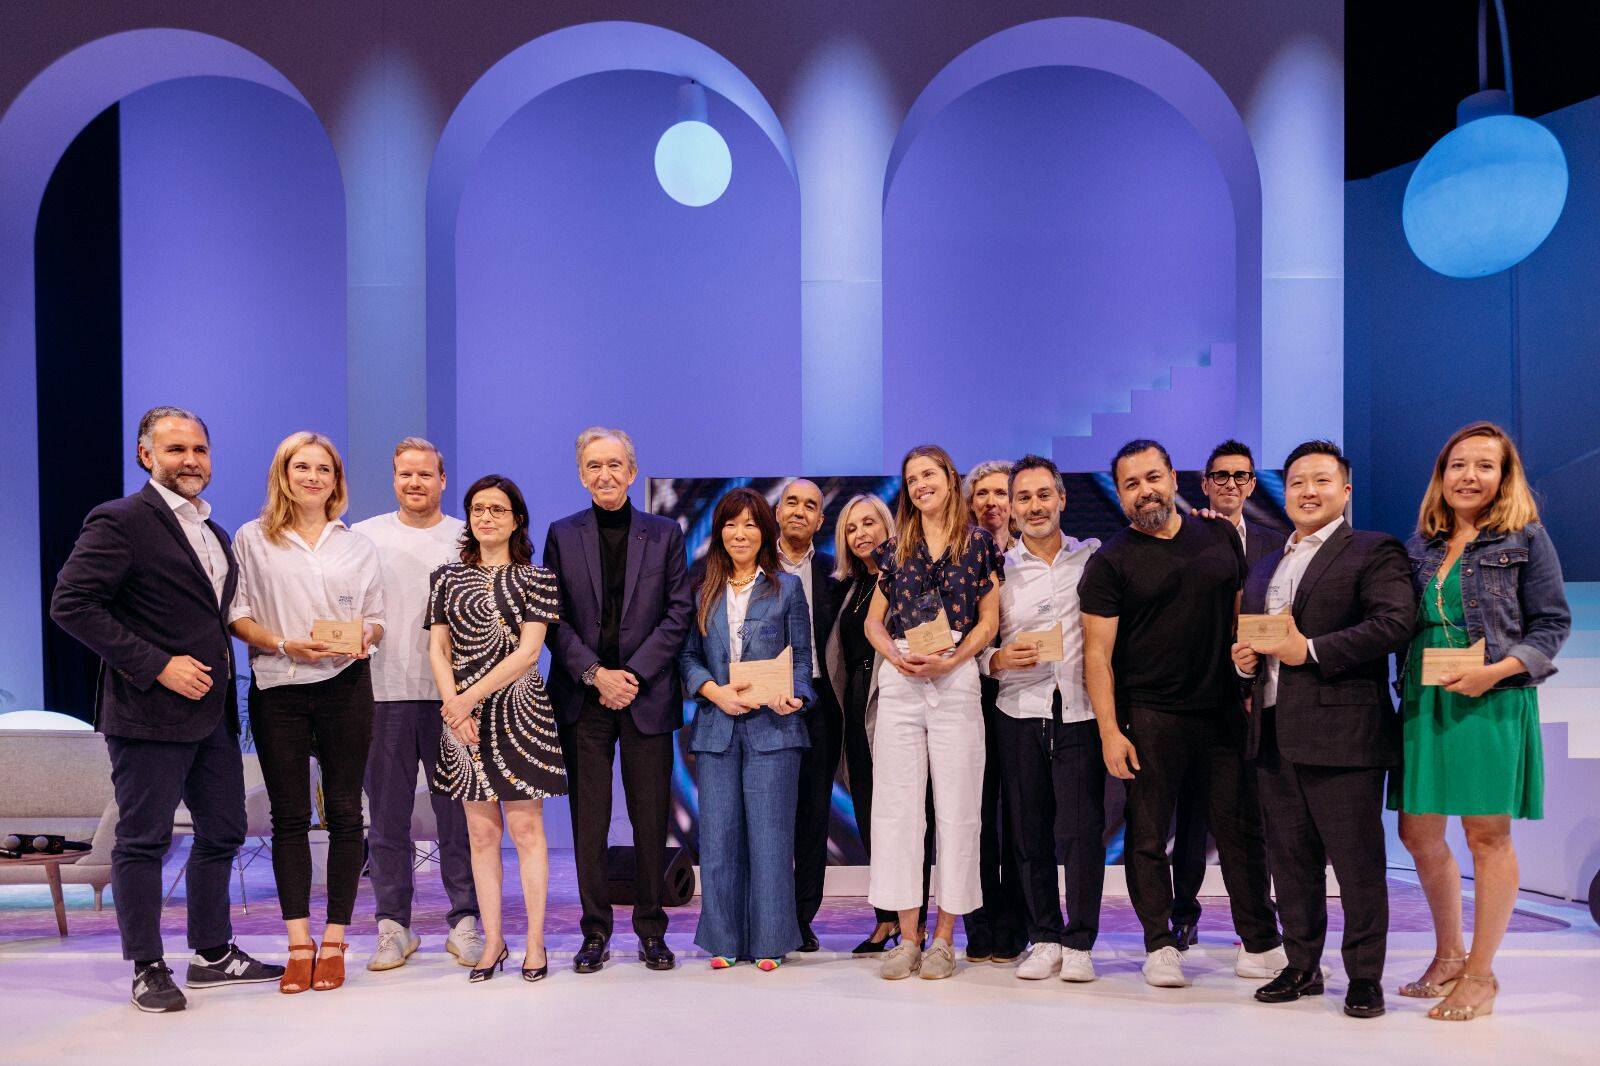 LVMH on X: #LVMH launches #INSIDELVMH, an immersive program for young  talents that deepens synergies between the academic and business worlds.  #LVMHtalents cc @CSM_news @Unibocconi @HECParis @essec @centralesupelec  @IfmParis  / X